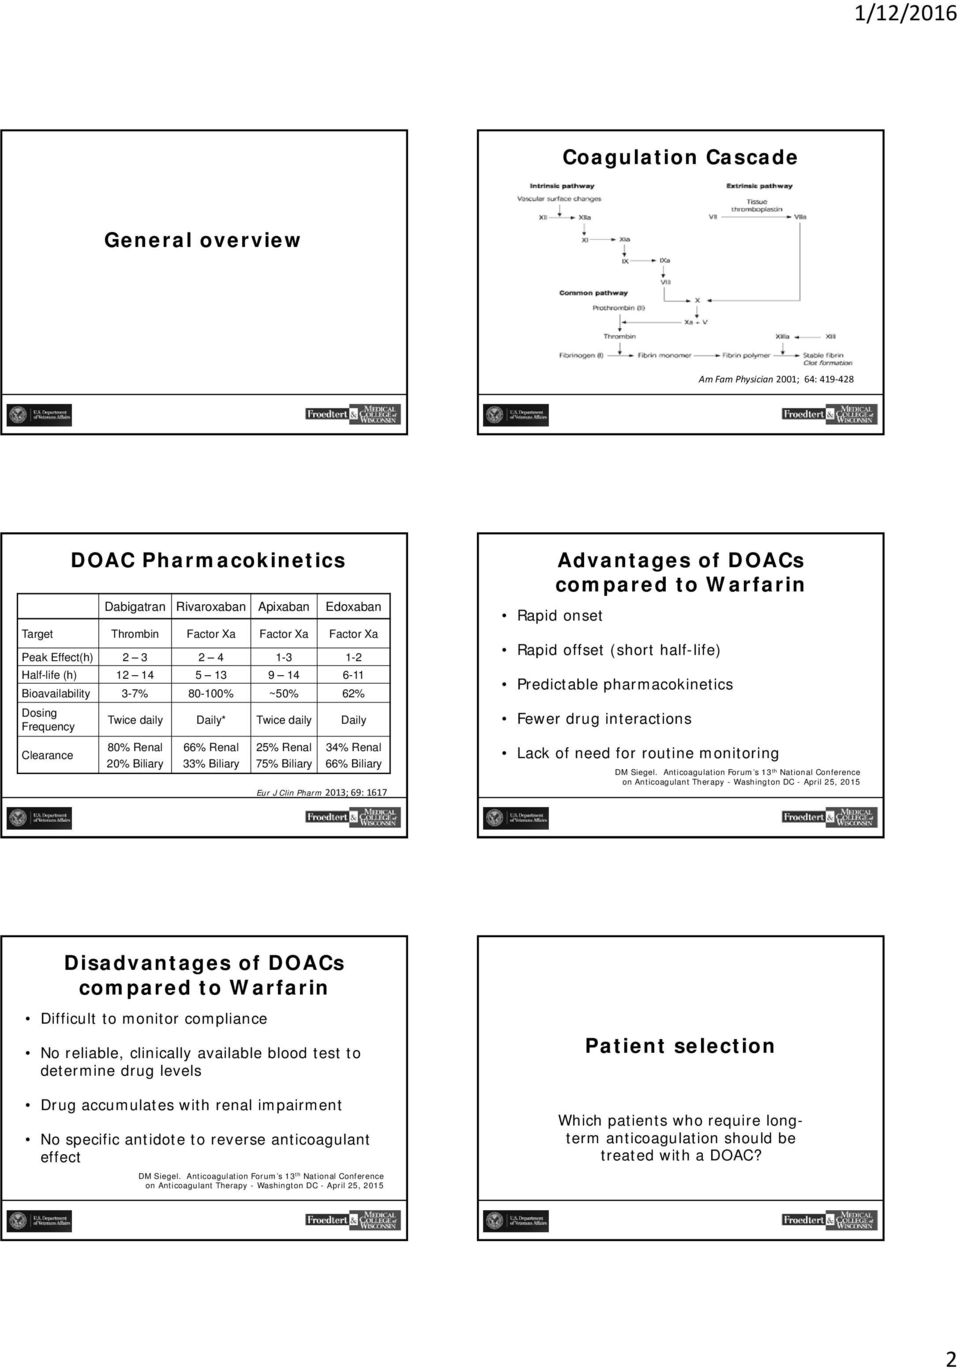 Renal 75% Biliary 34% Renal 66% Biliary Eur J Clin Pharm 2013; 69: 1617 Advantages of DOACs compared to Warfarin Rapid onset Rapid offset (short half-life) Predictable pharmacokinetics Fewer drug